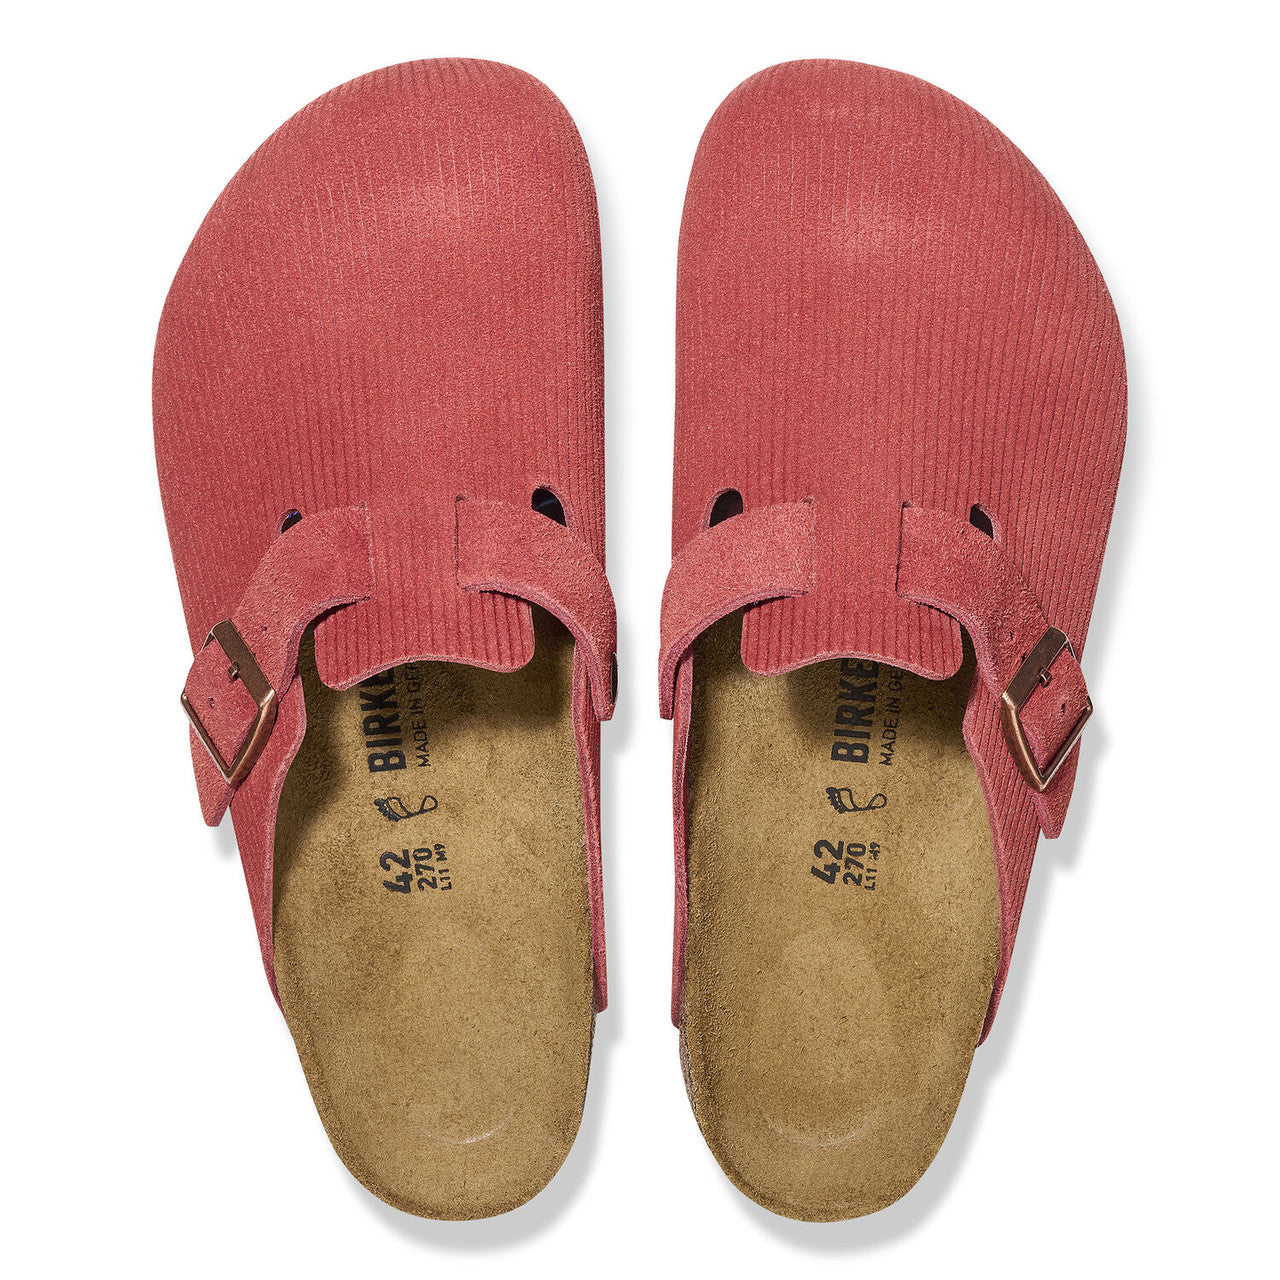 Boston Classic Footbed : Sienna Red Corduroy